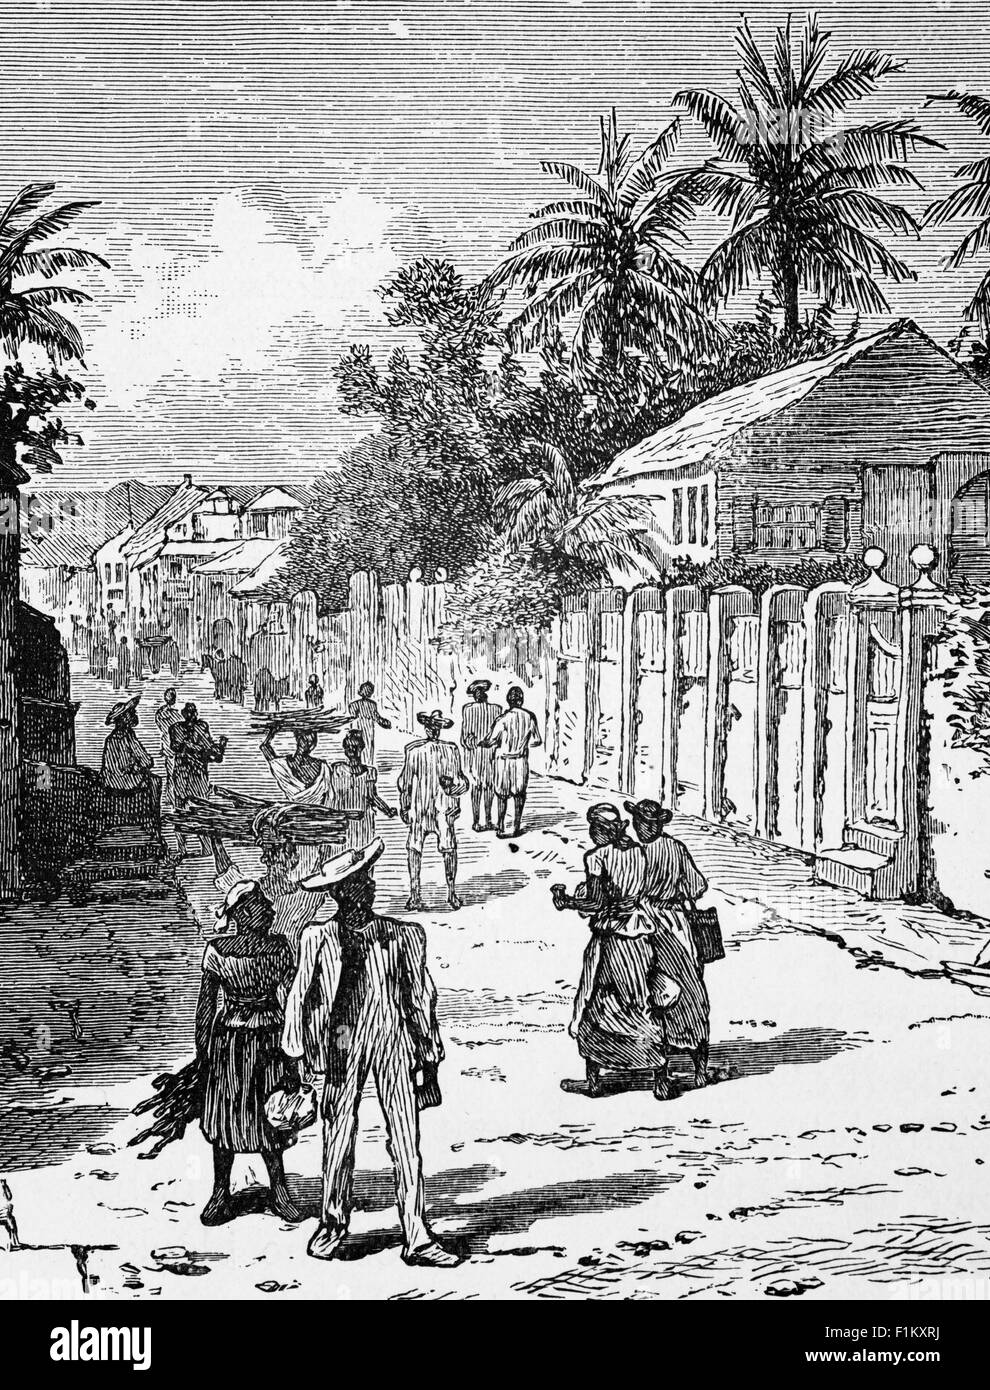 A 19th Century view of Kingston, the capital and largest city of Jamaica, located on the southeastern coast of the island. In 1848 the Jamaican government expanded Kingston by constructing new homes in the west, north and east of the city. This housing became highly segregated in terms of race and class and by 1860 the majority of white elites lived on the outskirts of the city. Stock Photo